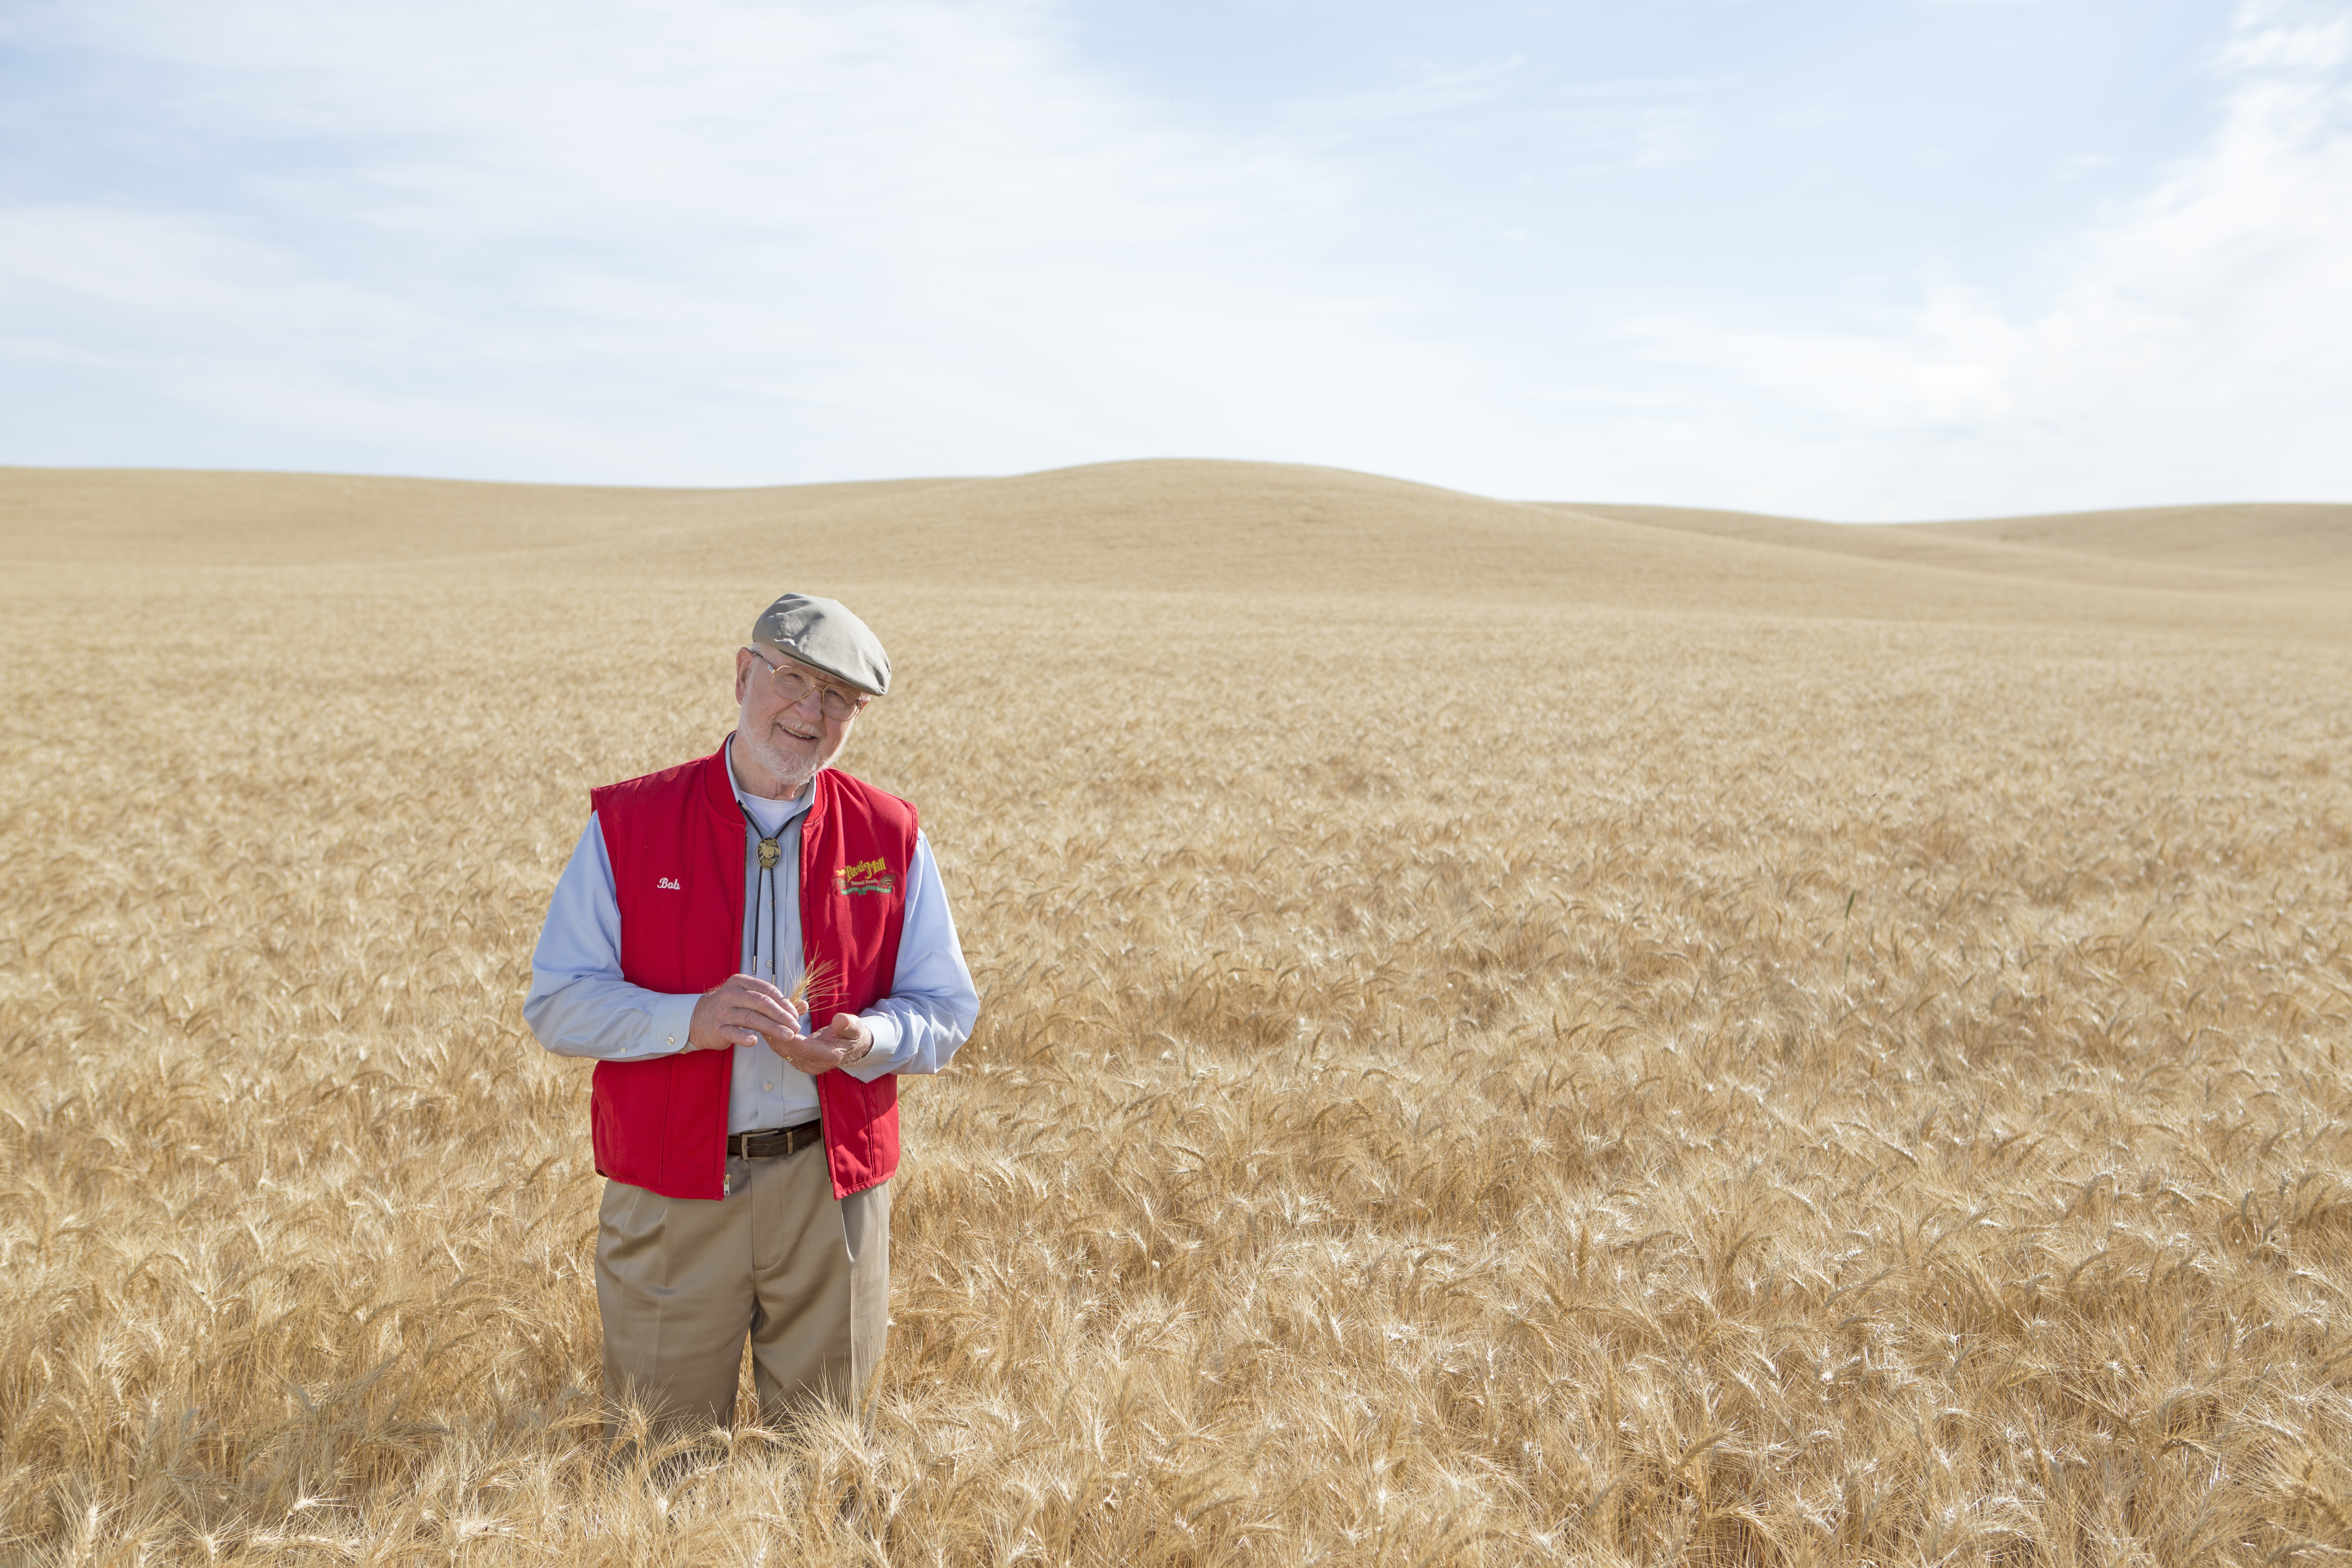 Bob Moore standing in a golden field of grain. The grain fills the foreground and background, and the sky is blue and cloudy.